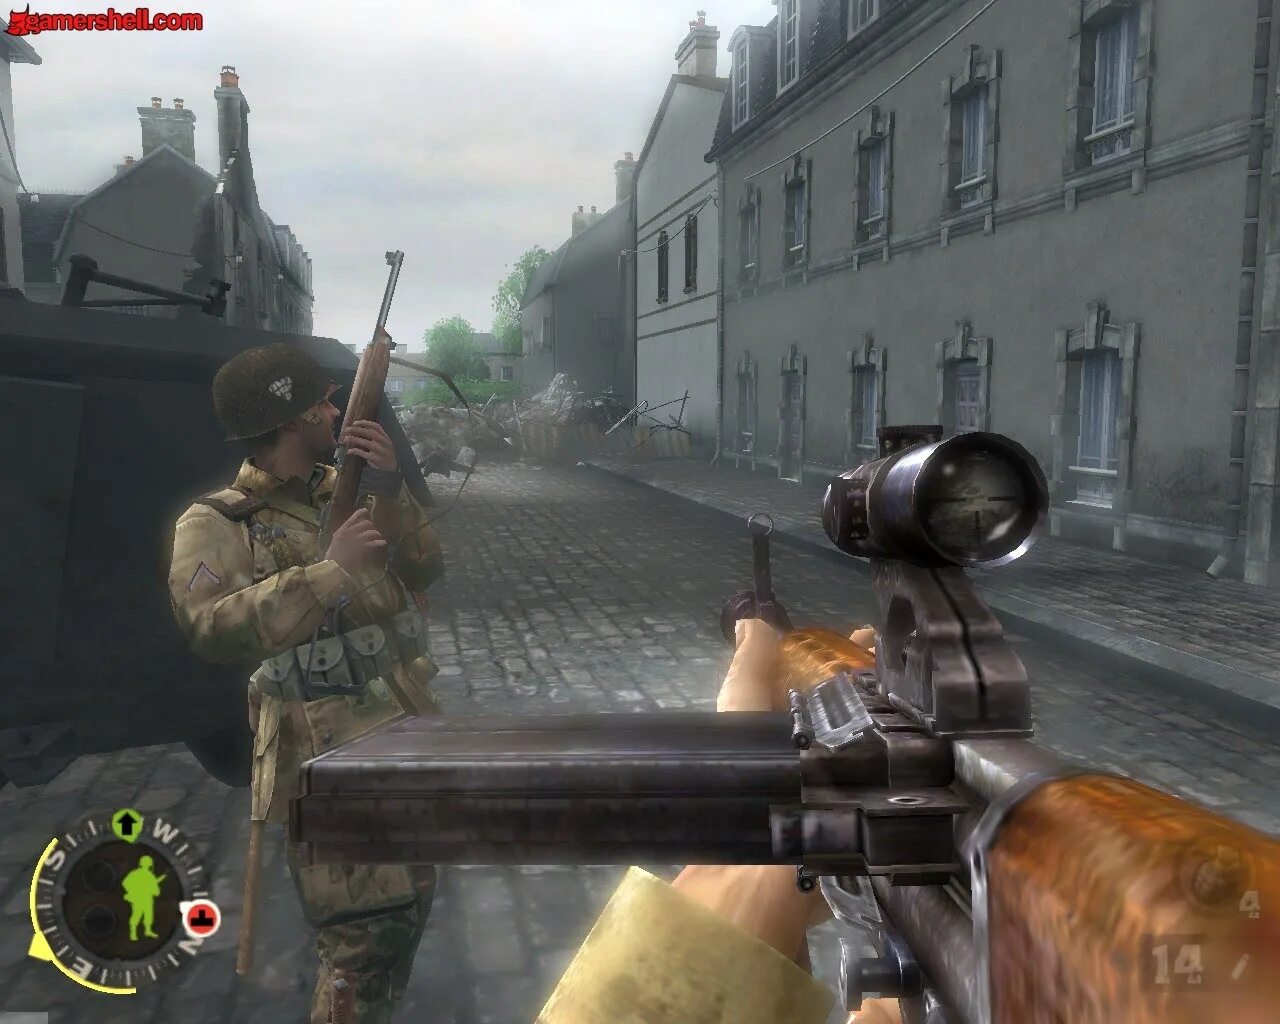 Игра оружие времени. Игра brothers in Arms earned in Blood. Игра brothers in Arms 1. Brothers in Arms: earned in Blood (2005). Brothers in Arms 2005.